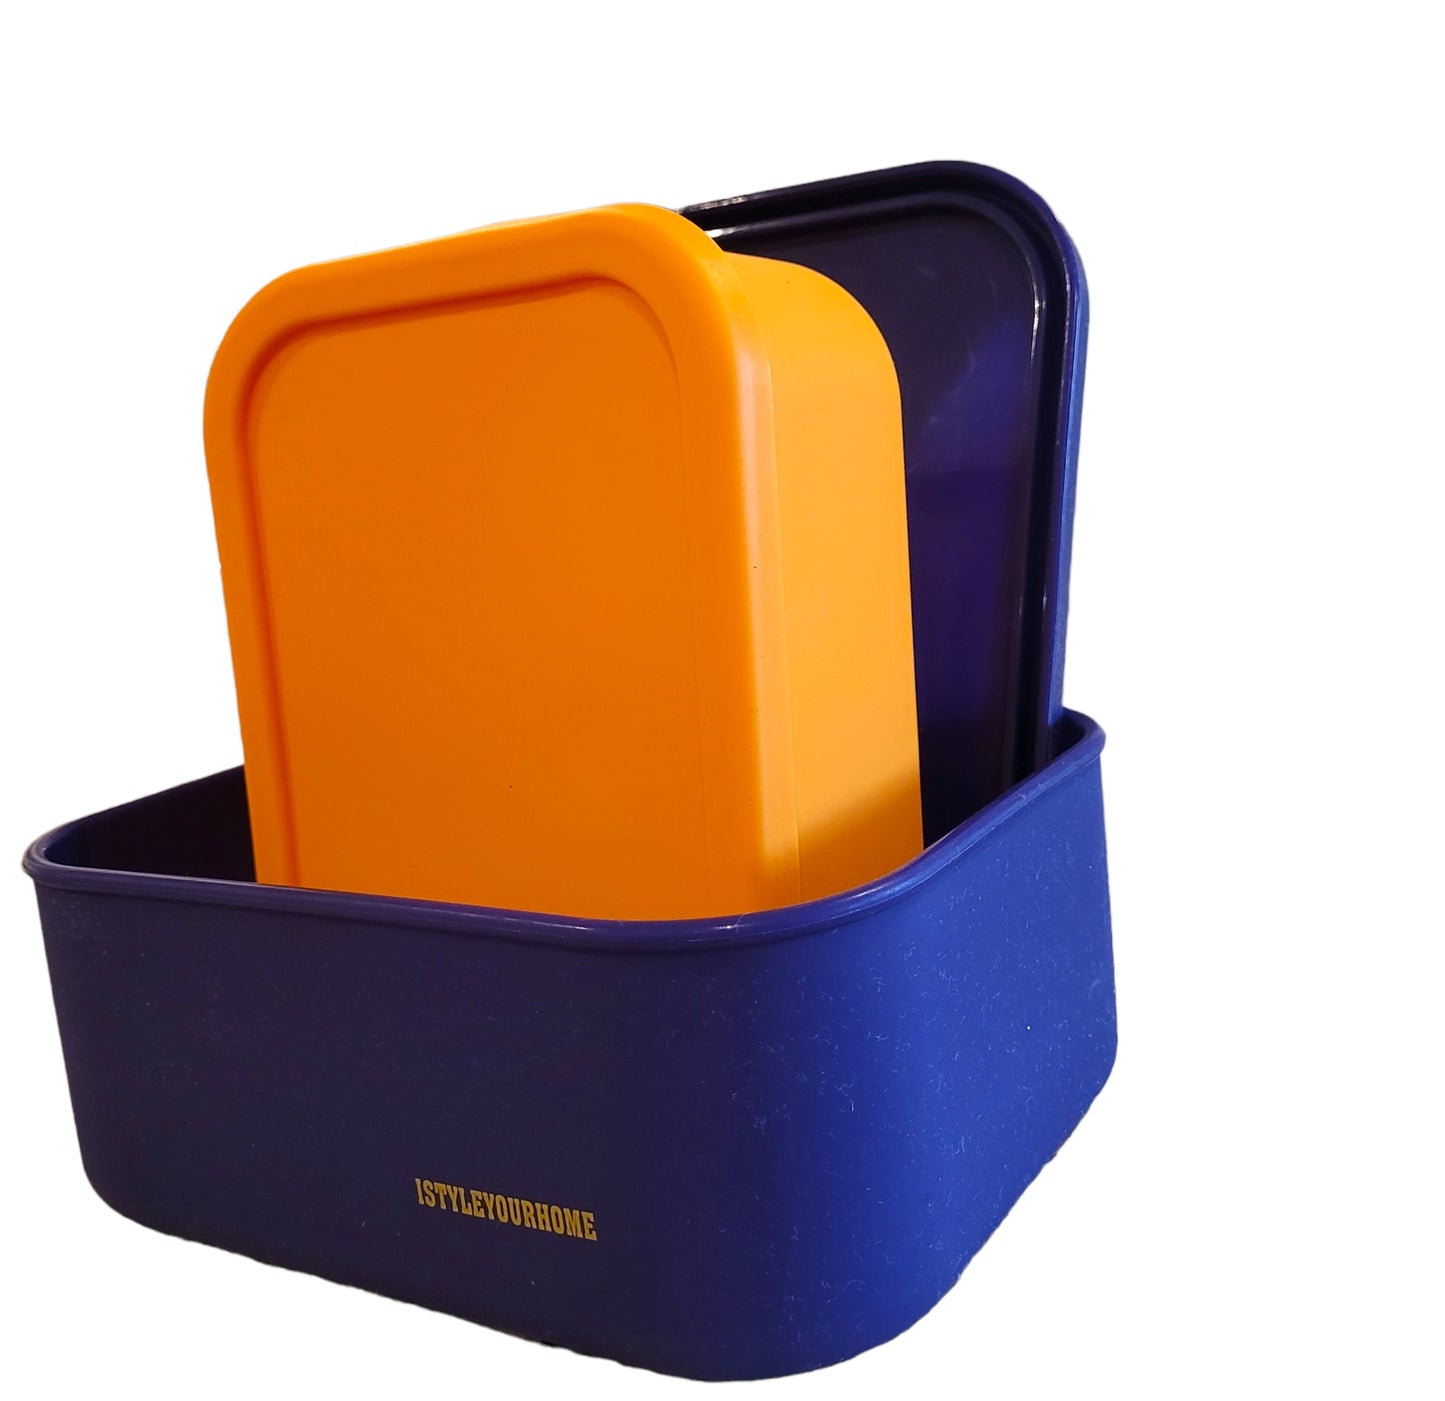 Silicone BENTO Food Storage Containers with Lids - Set of 2 Multi-Color in Canvas Bag (Purple-XL/Mustard-L)